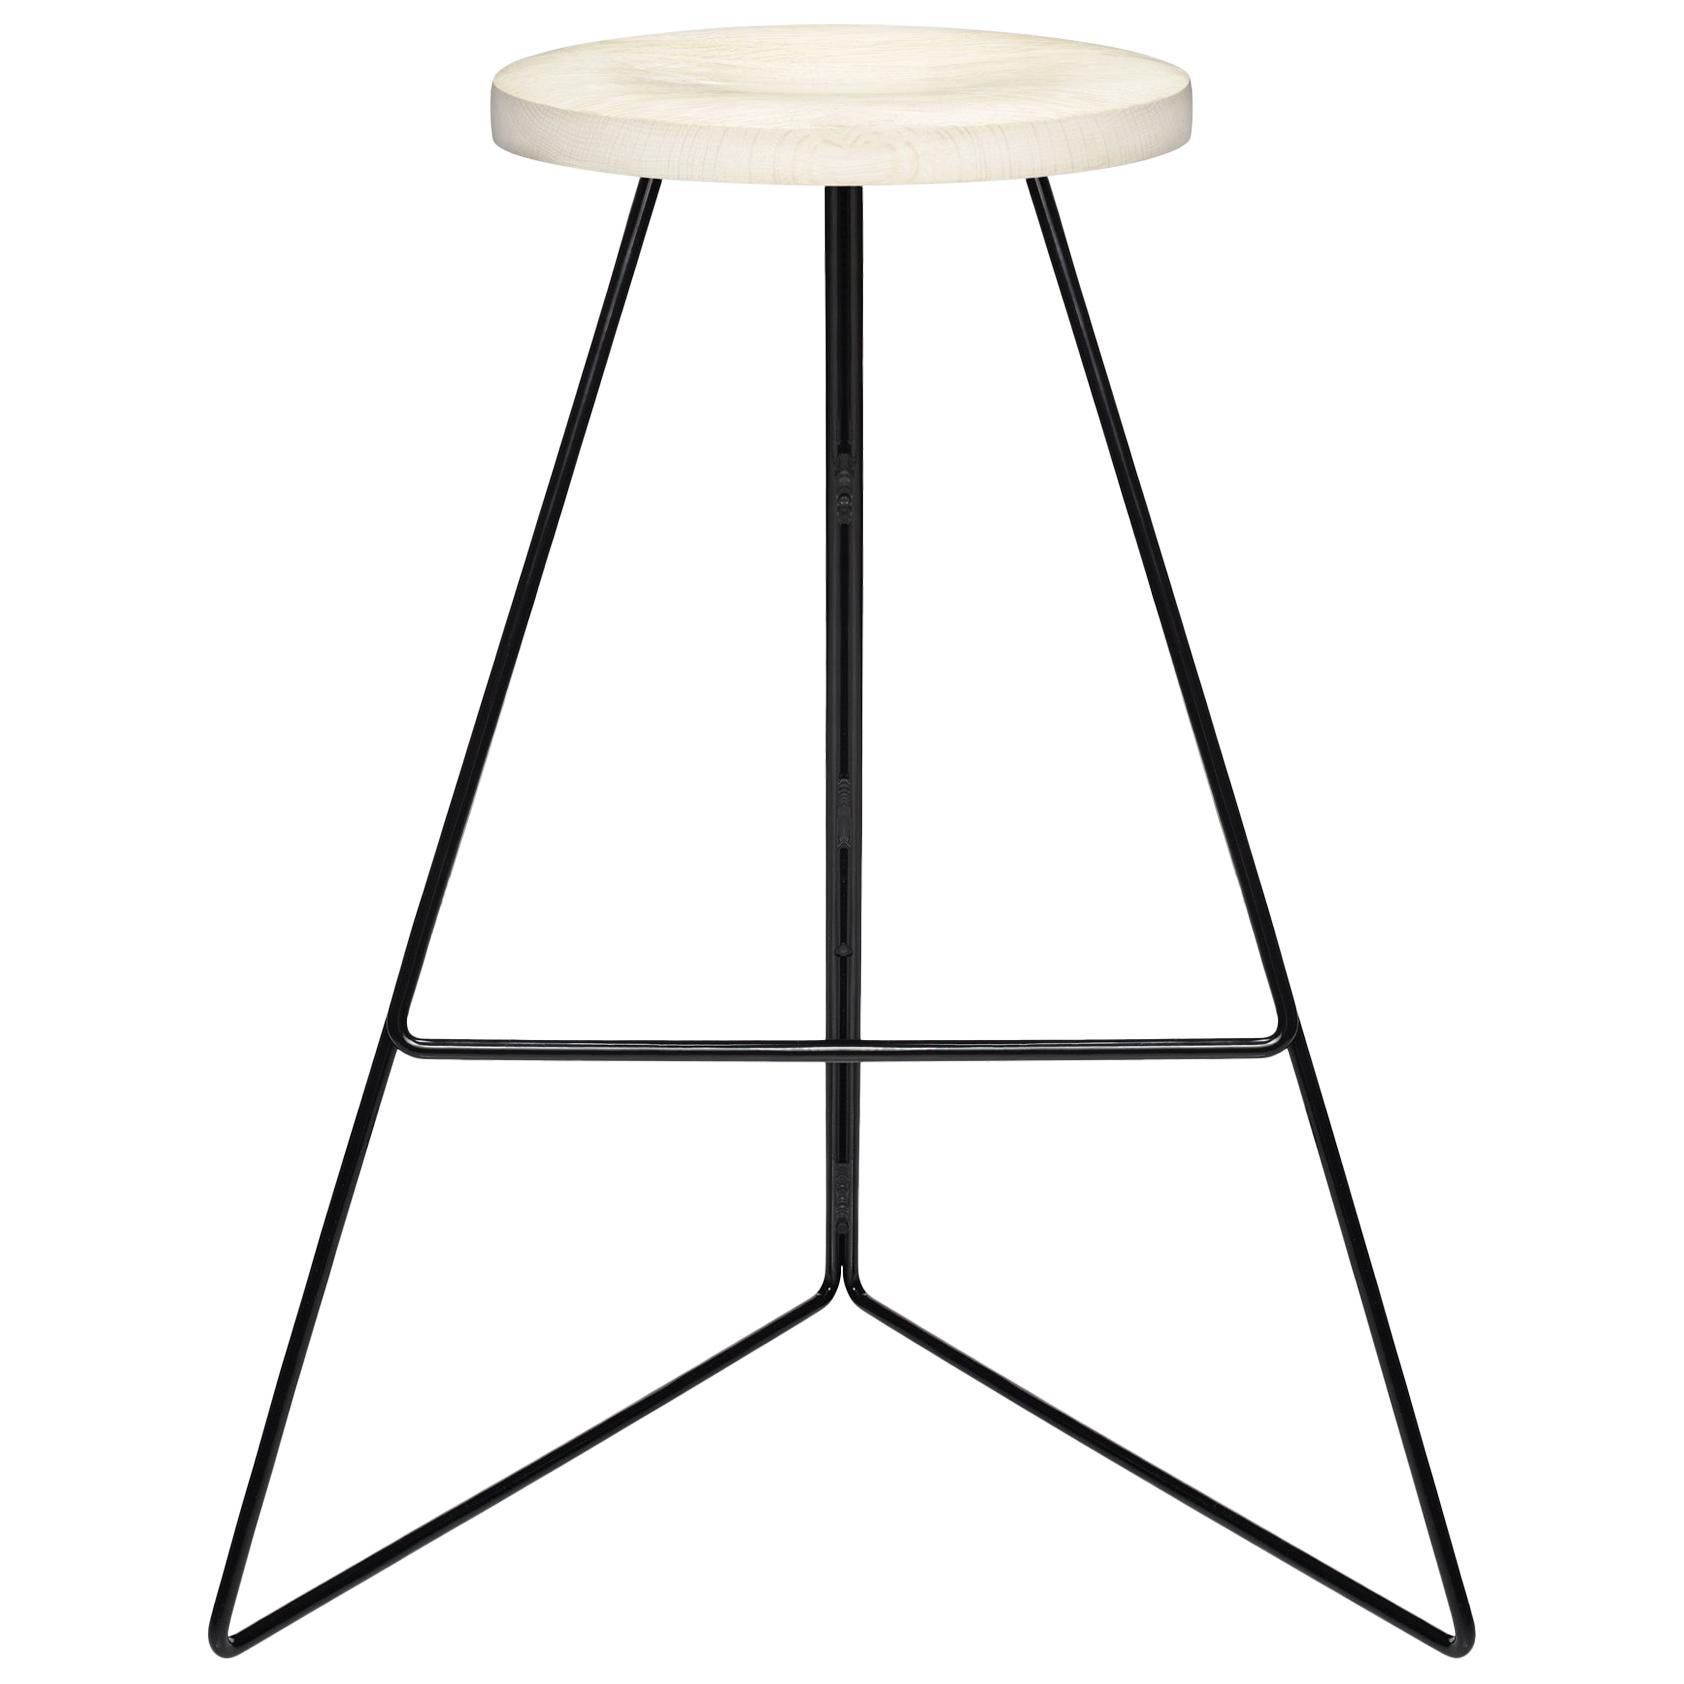 The Coleman Stool - Black and Maple, Counter Height. 54 Variations Available. For Sale